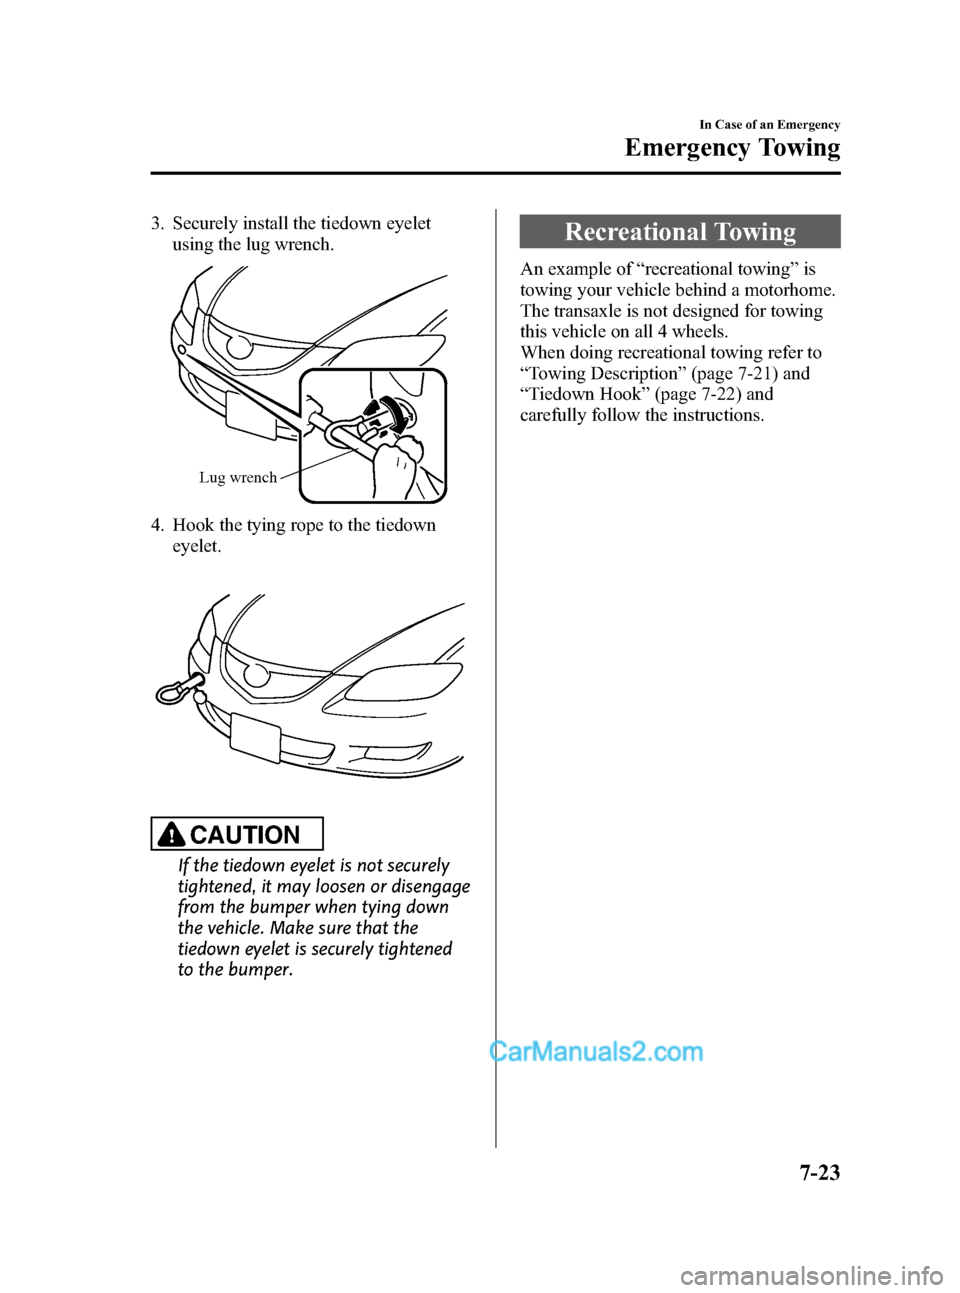 MAZDA MODEL MAZDASPEED 3 2008  Owners Manual (in English) Black plate (267,1)
3. Securely install the tiedown eyelet
using the lug wrench.
Lug wrench
4. Hook the tying rope to the tiedown
eyelet.
CAUTION
If the tiedown eyelet is not securely
tightened, it ma